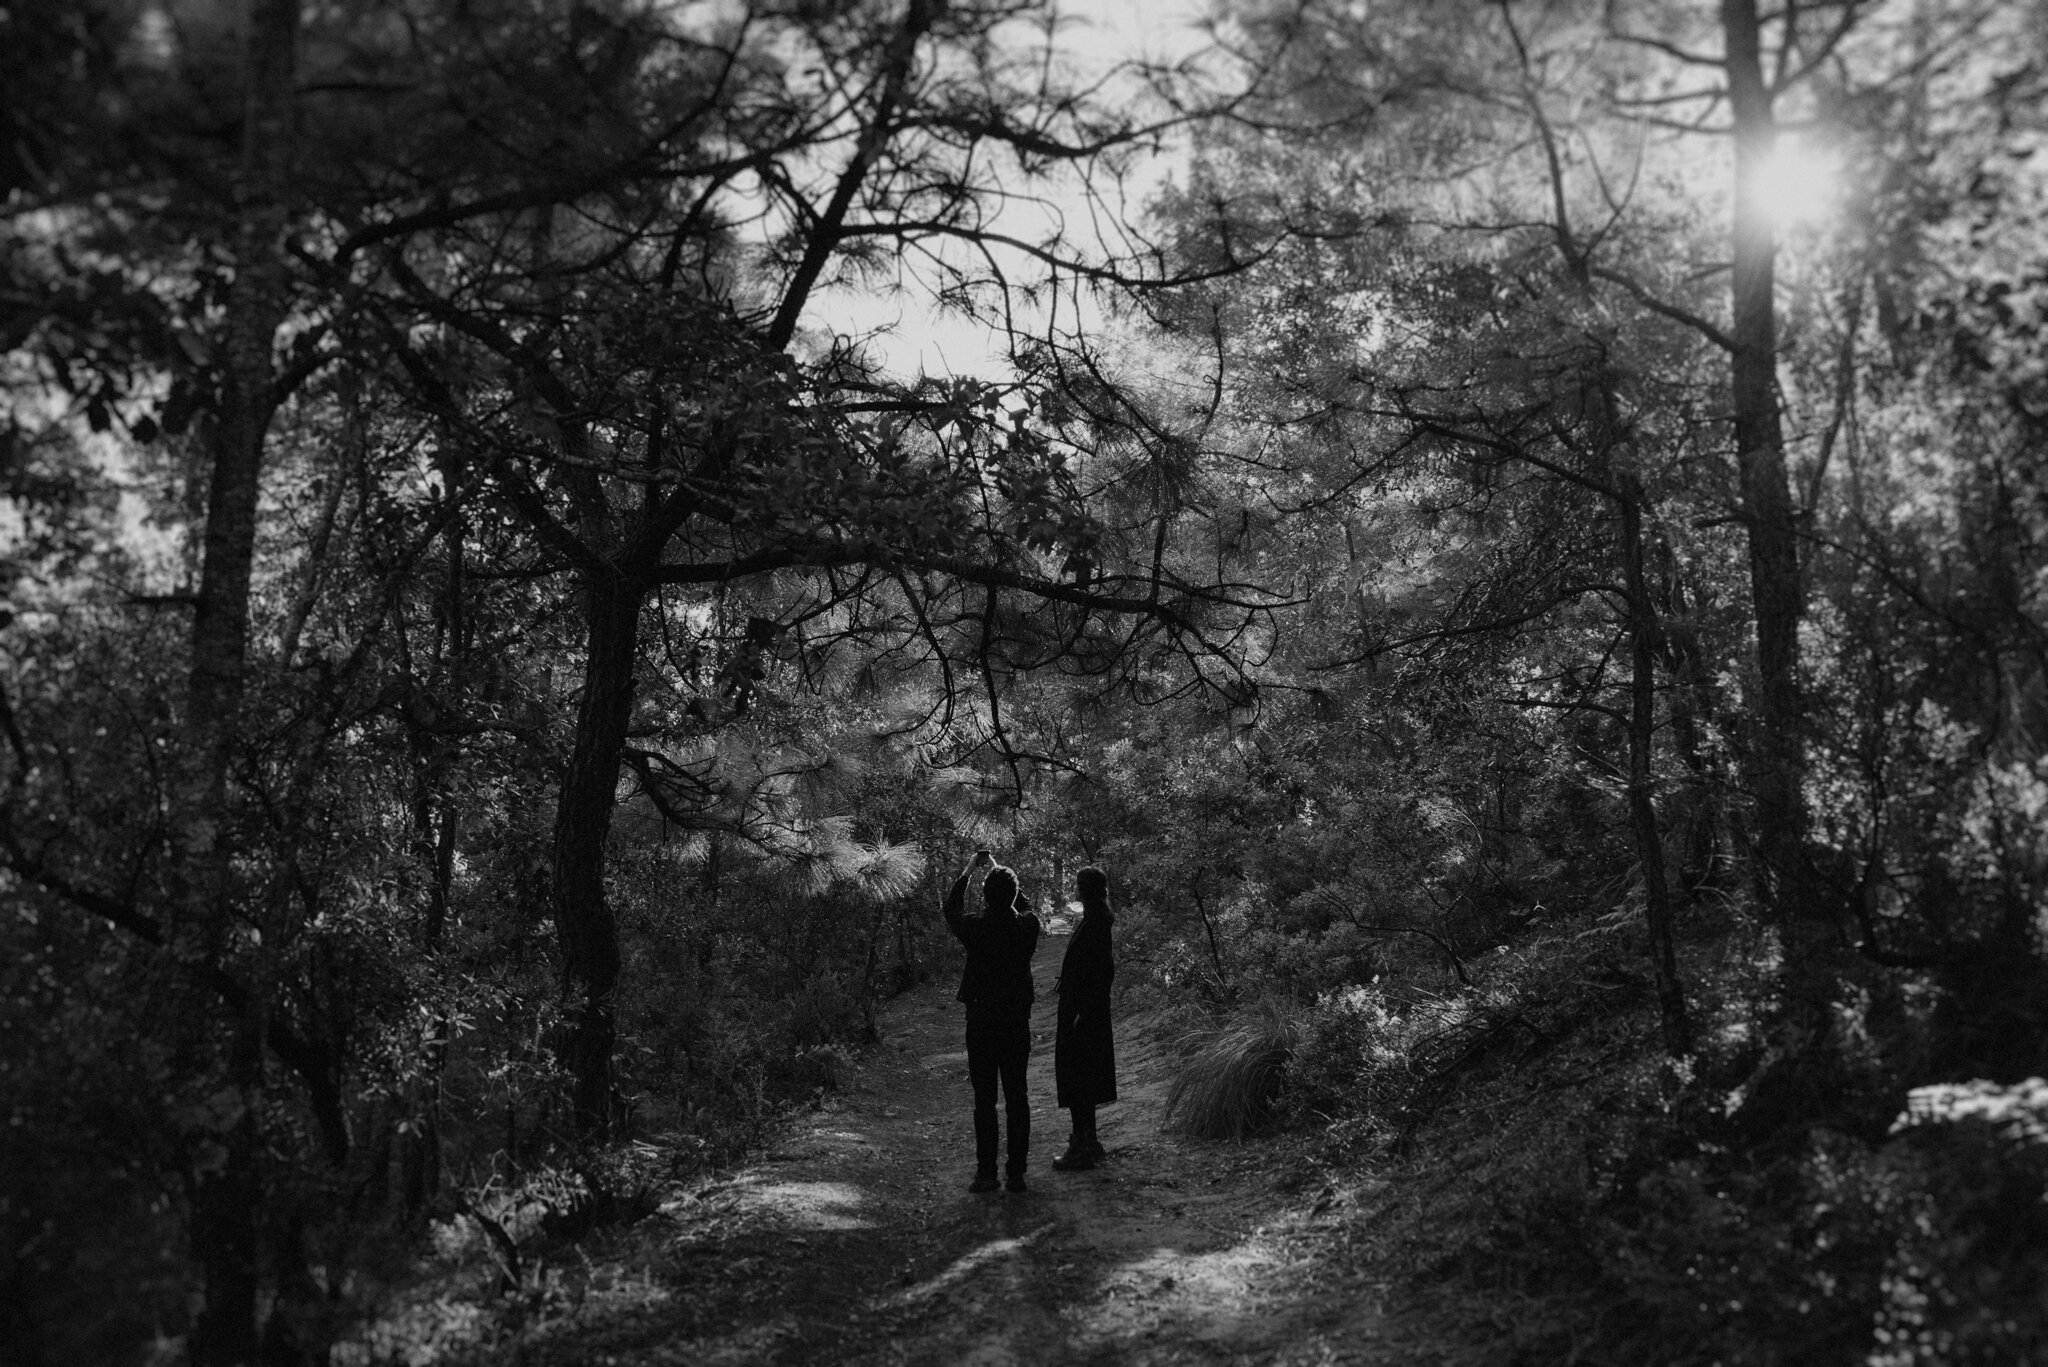 MEXICO COUPLE SESSION - IN THE WOODS - ANNA SAUZA PHOTOGRAPHY -35.jpg